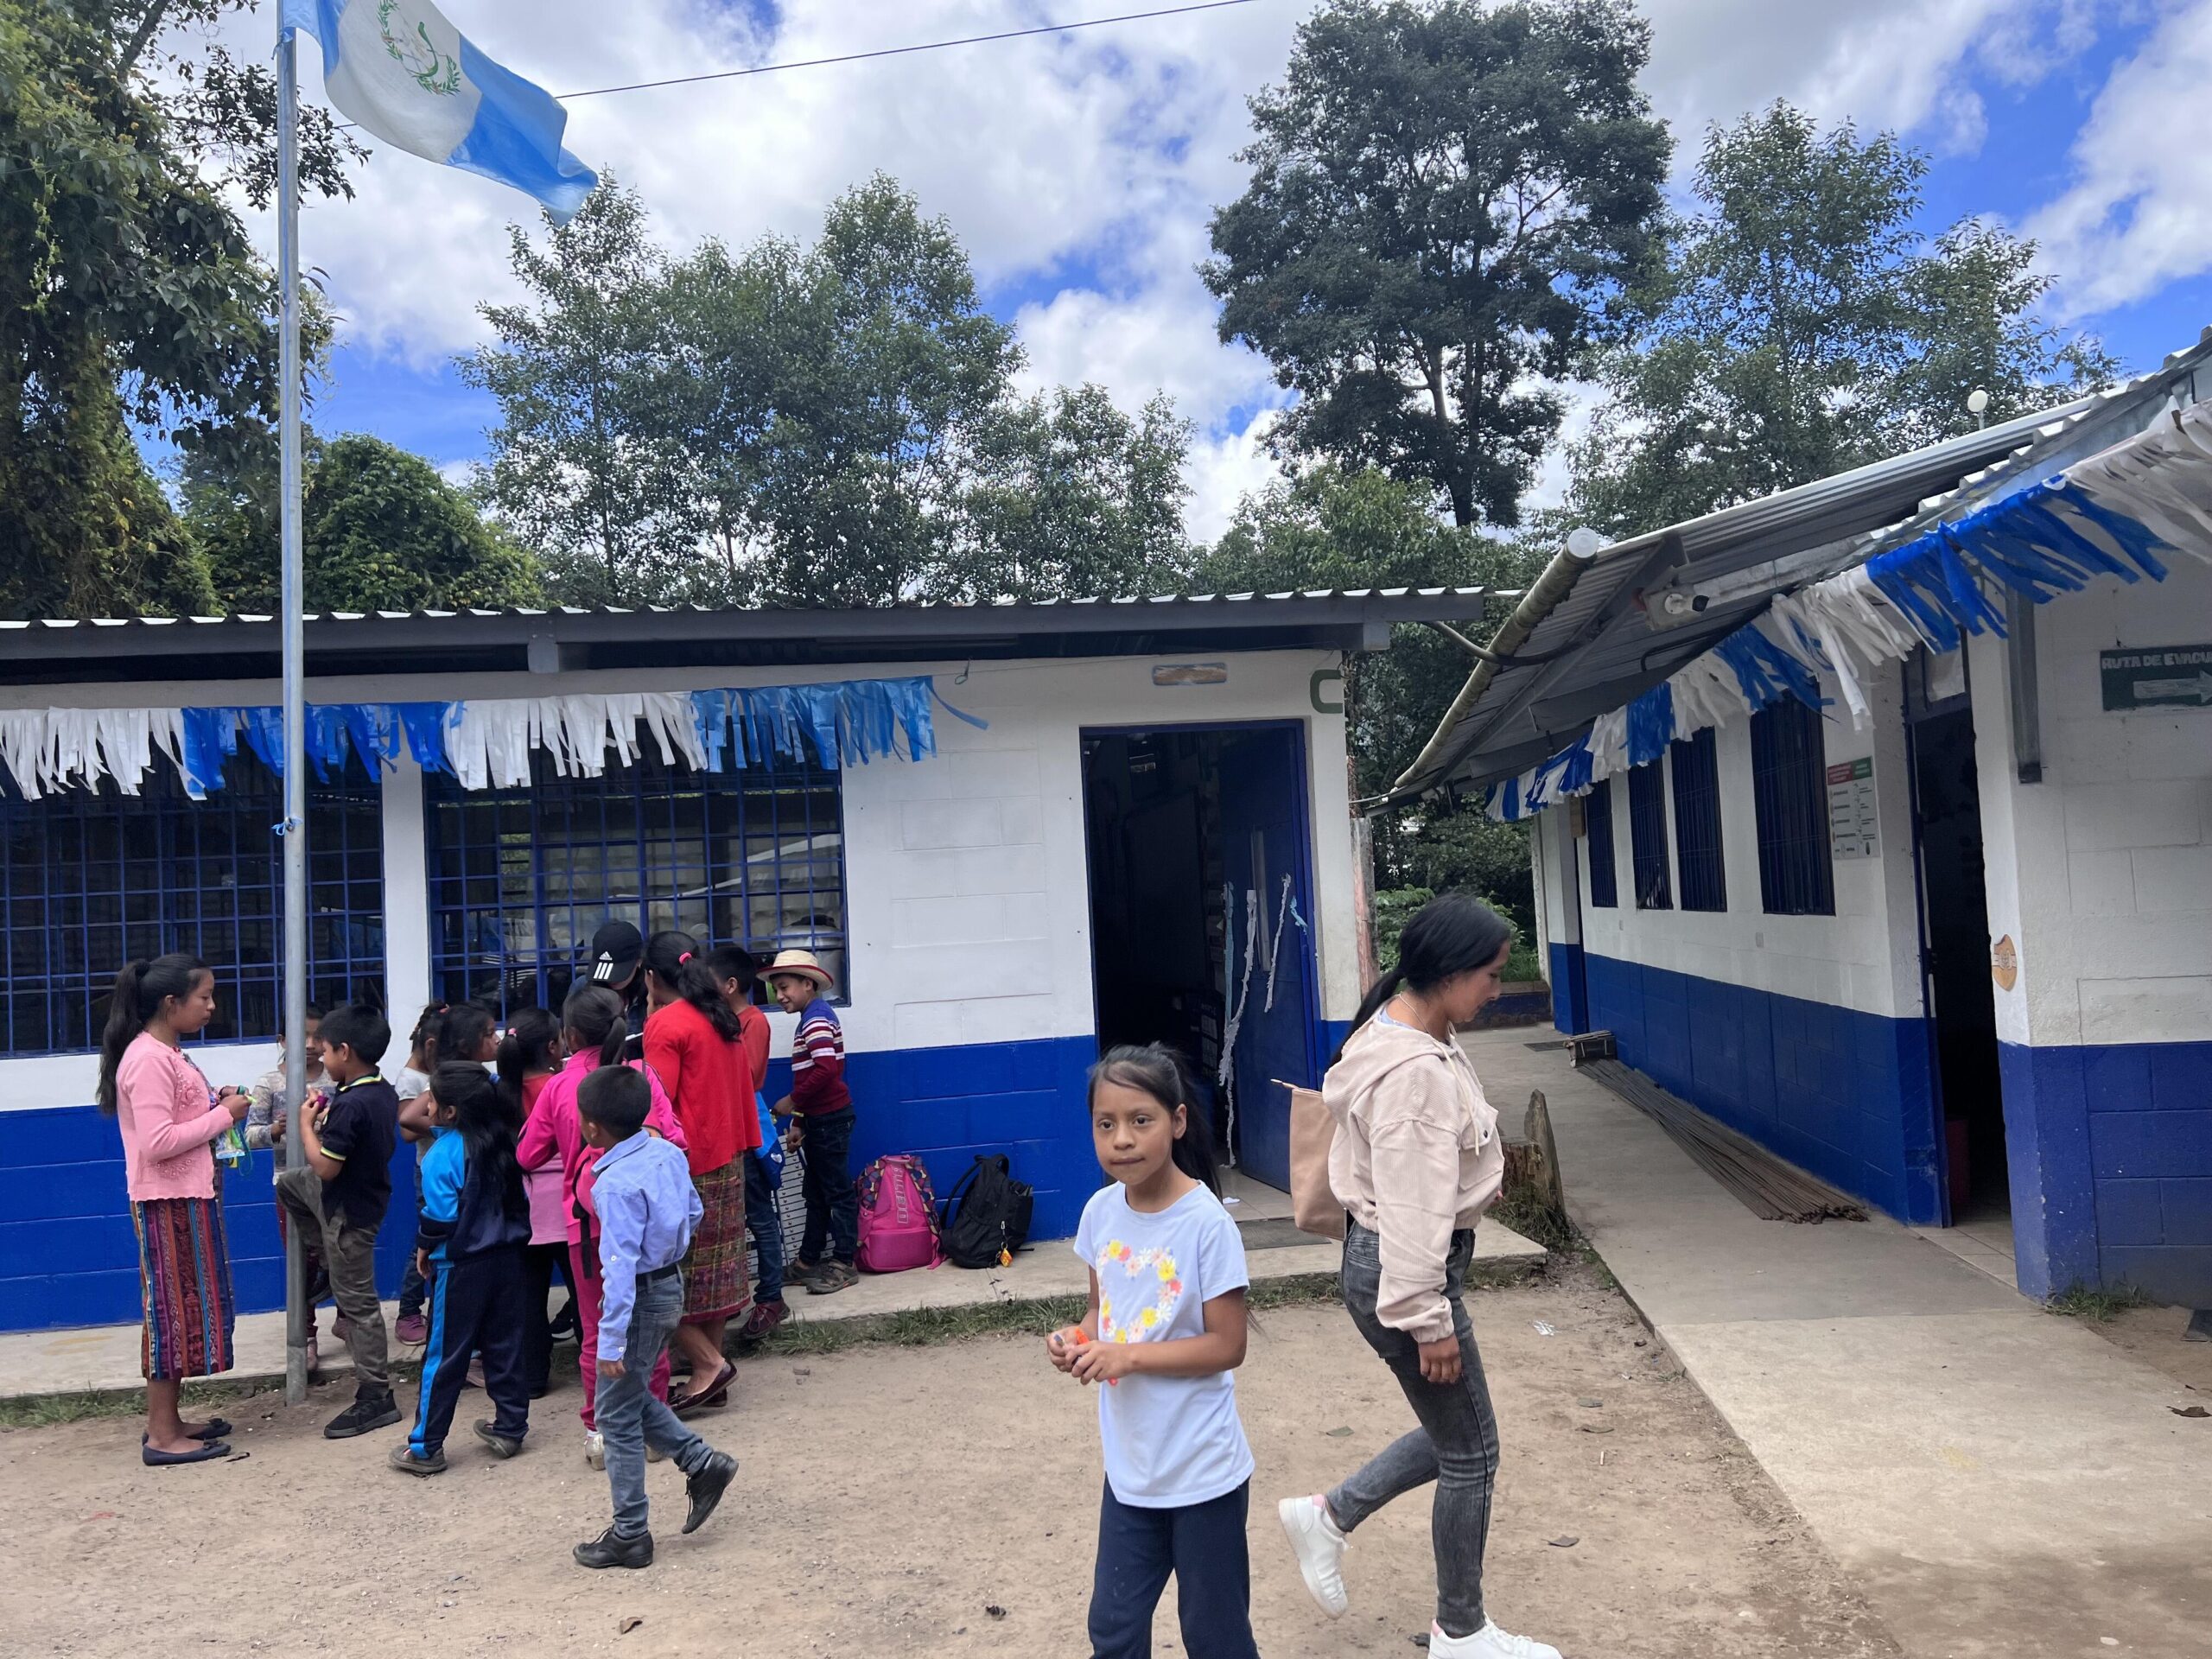 Children and teachers in a dirt courtyard between cinderblock buildings with blue and white banners.